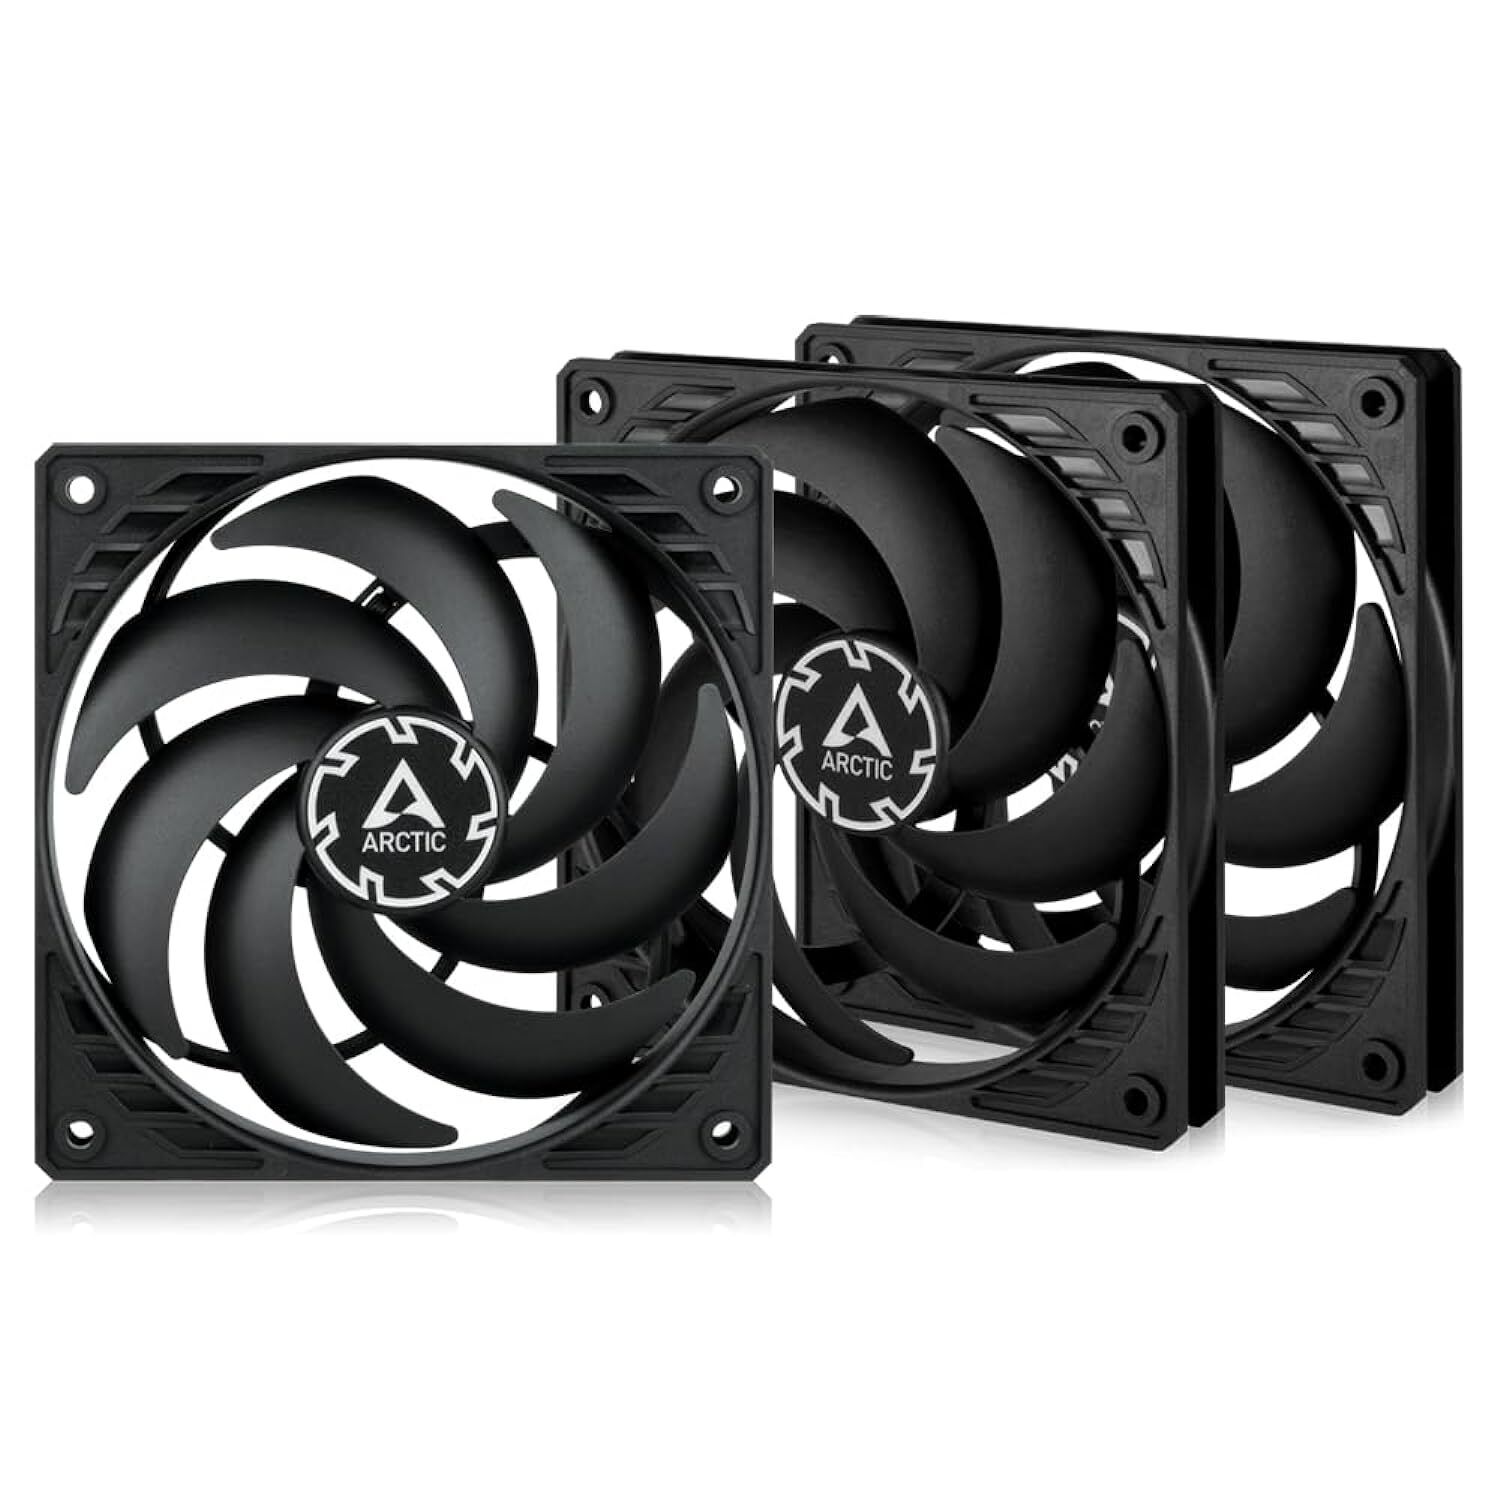 Arctic P12 Slim Pwm Pst (3 Pack) - 120 Mm Case Fan With Pwm Sharing Technology